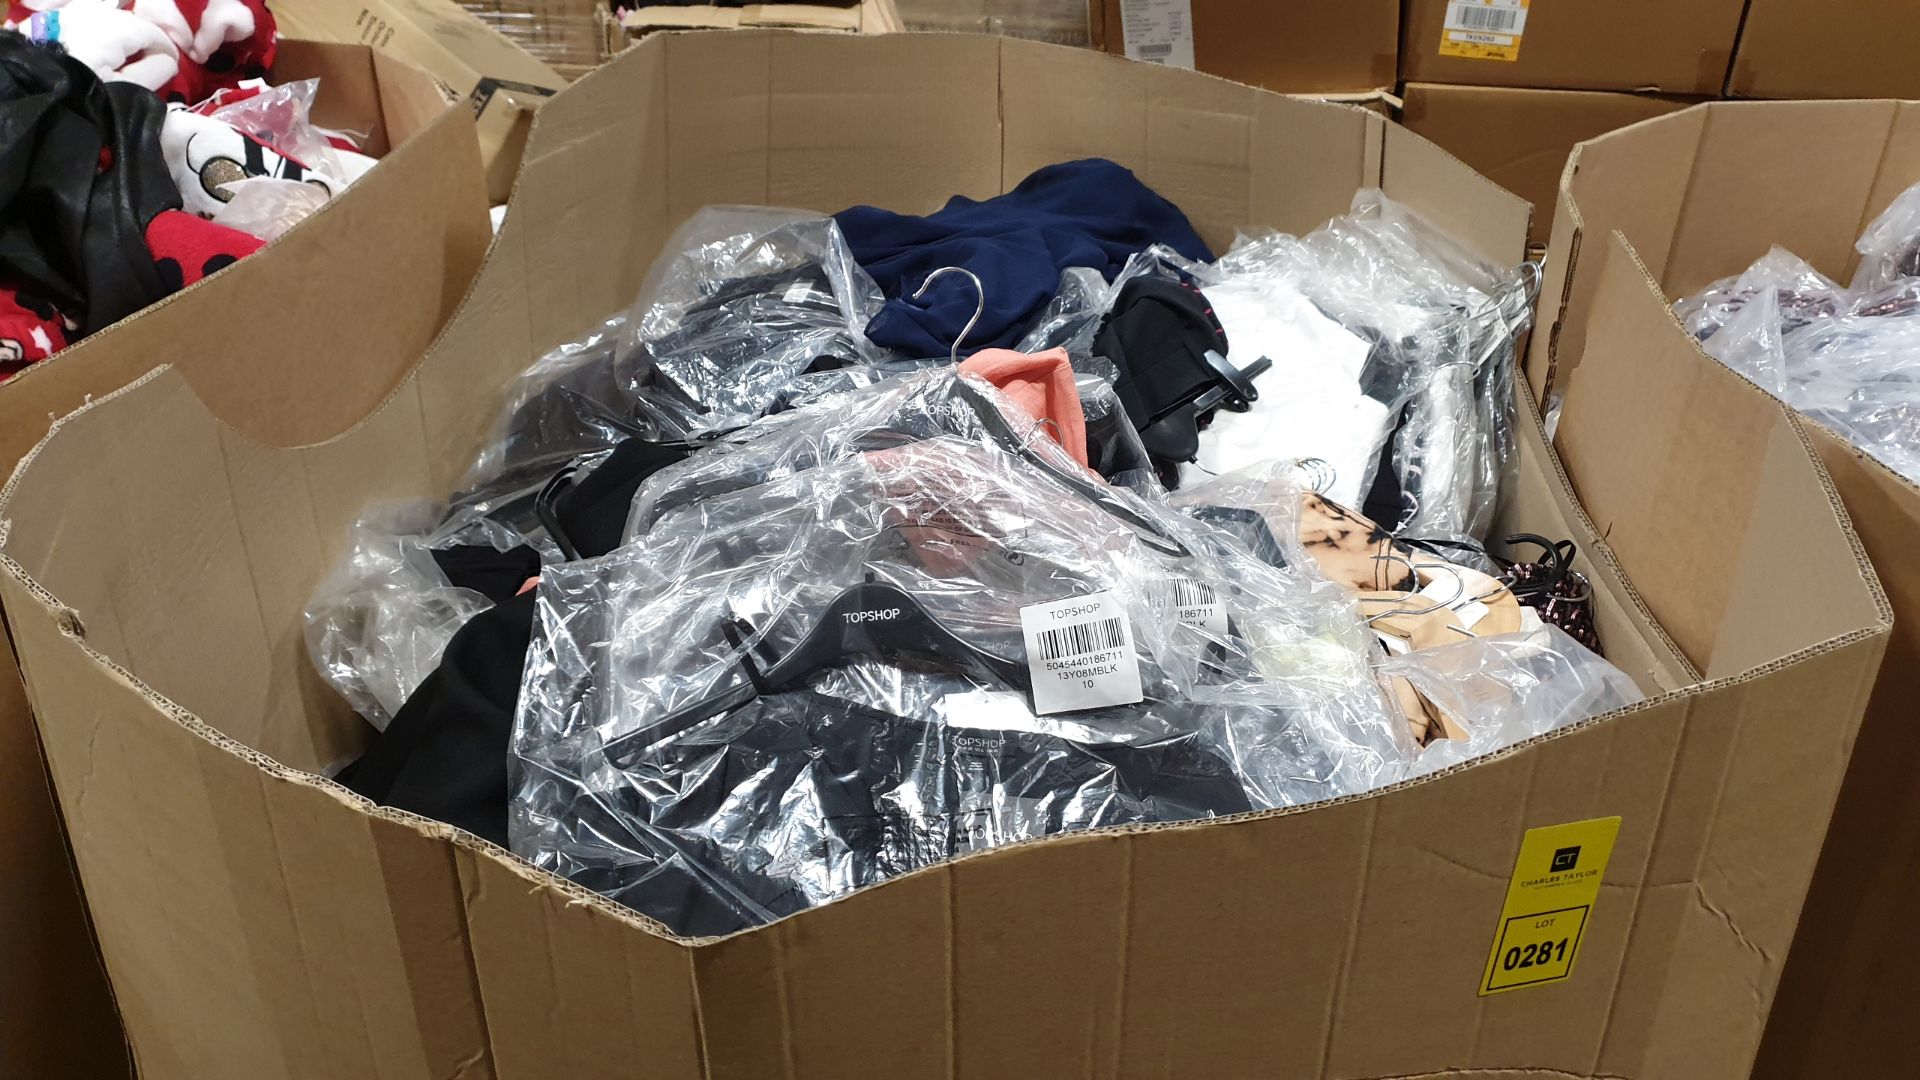 FULL PALLET OF CLOTHING IN VARIOUS STYLES AND SIZES IE DOROTHY PERKINS DRESSES AND TOPSHOP JEANS AND